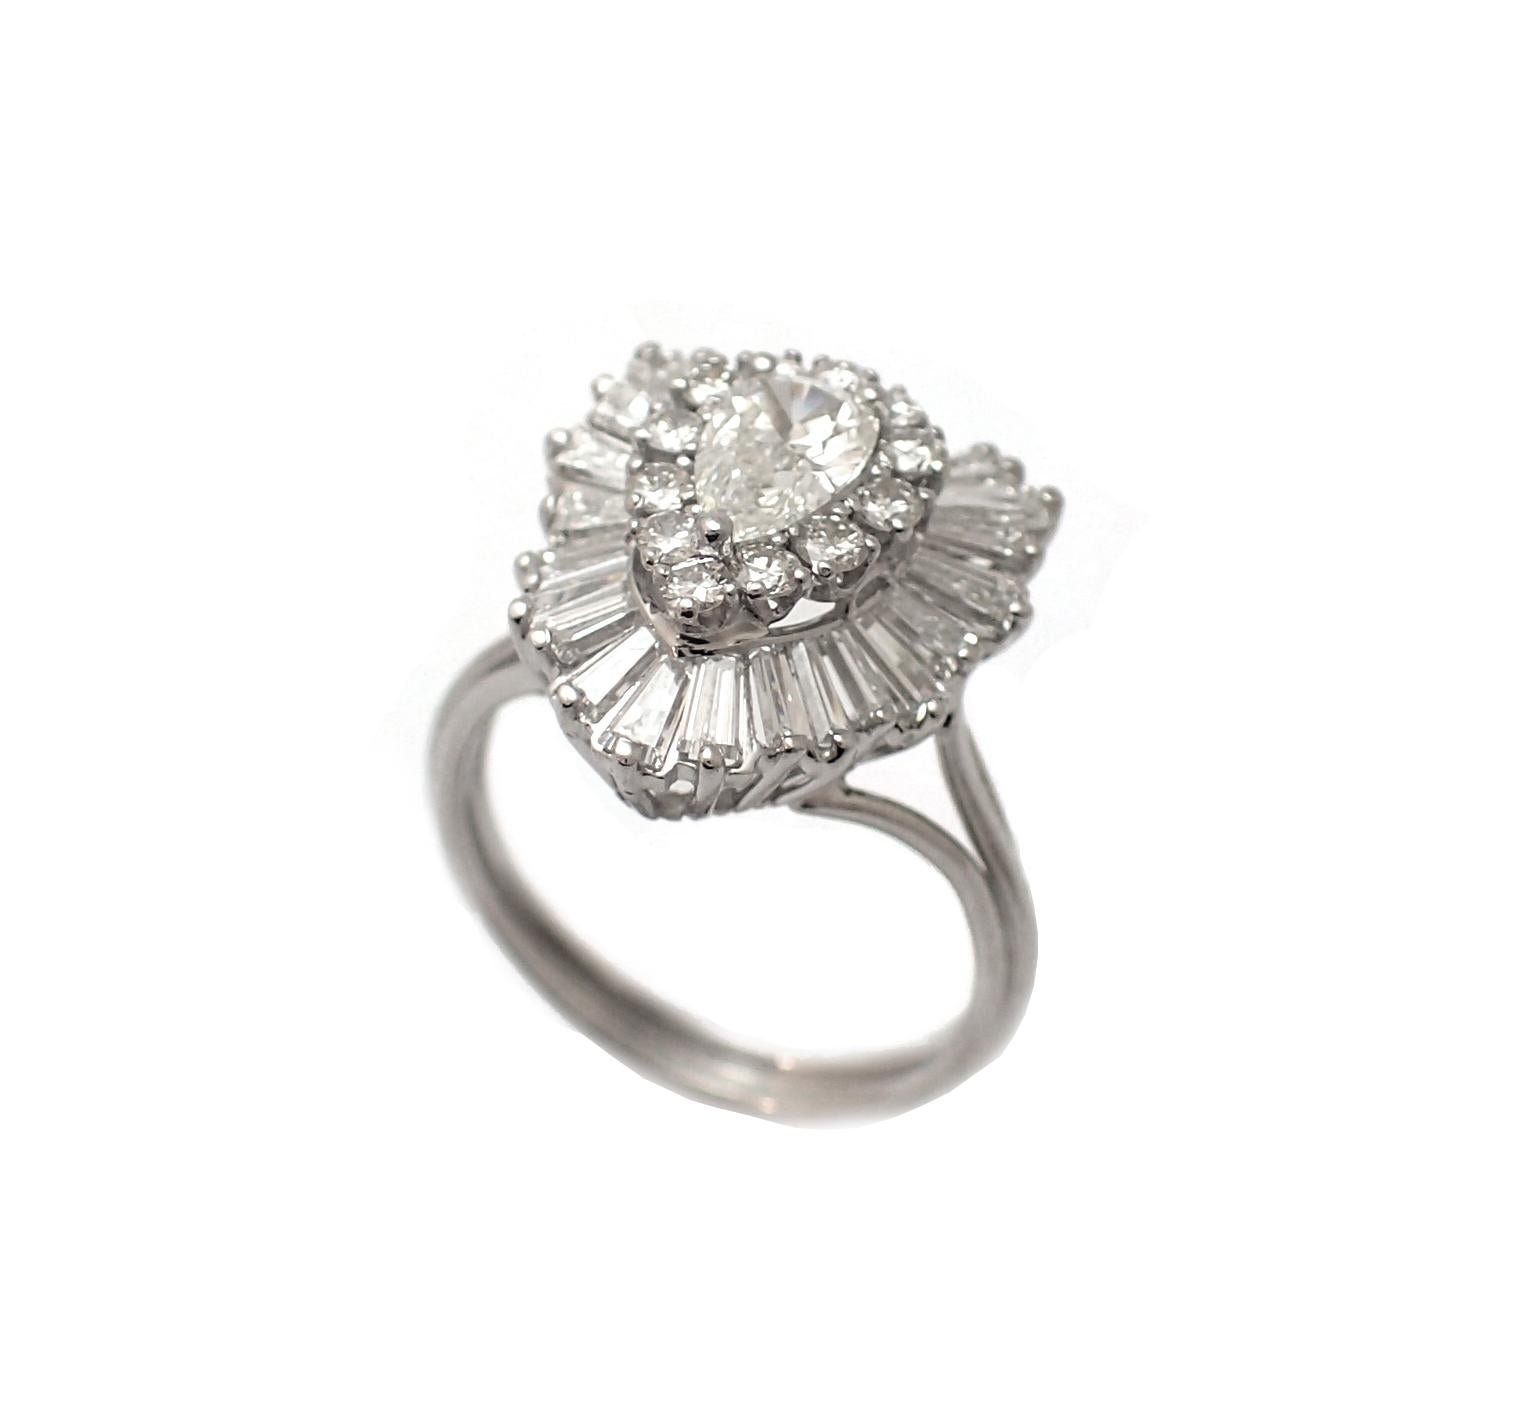 This magnificent example of 1960s ballerina style rings features a 0.6ct (estimated) center stone surrounded by a 